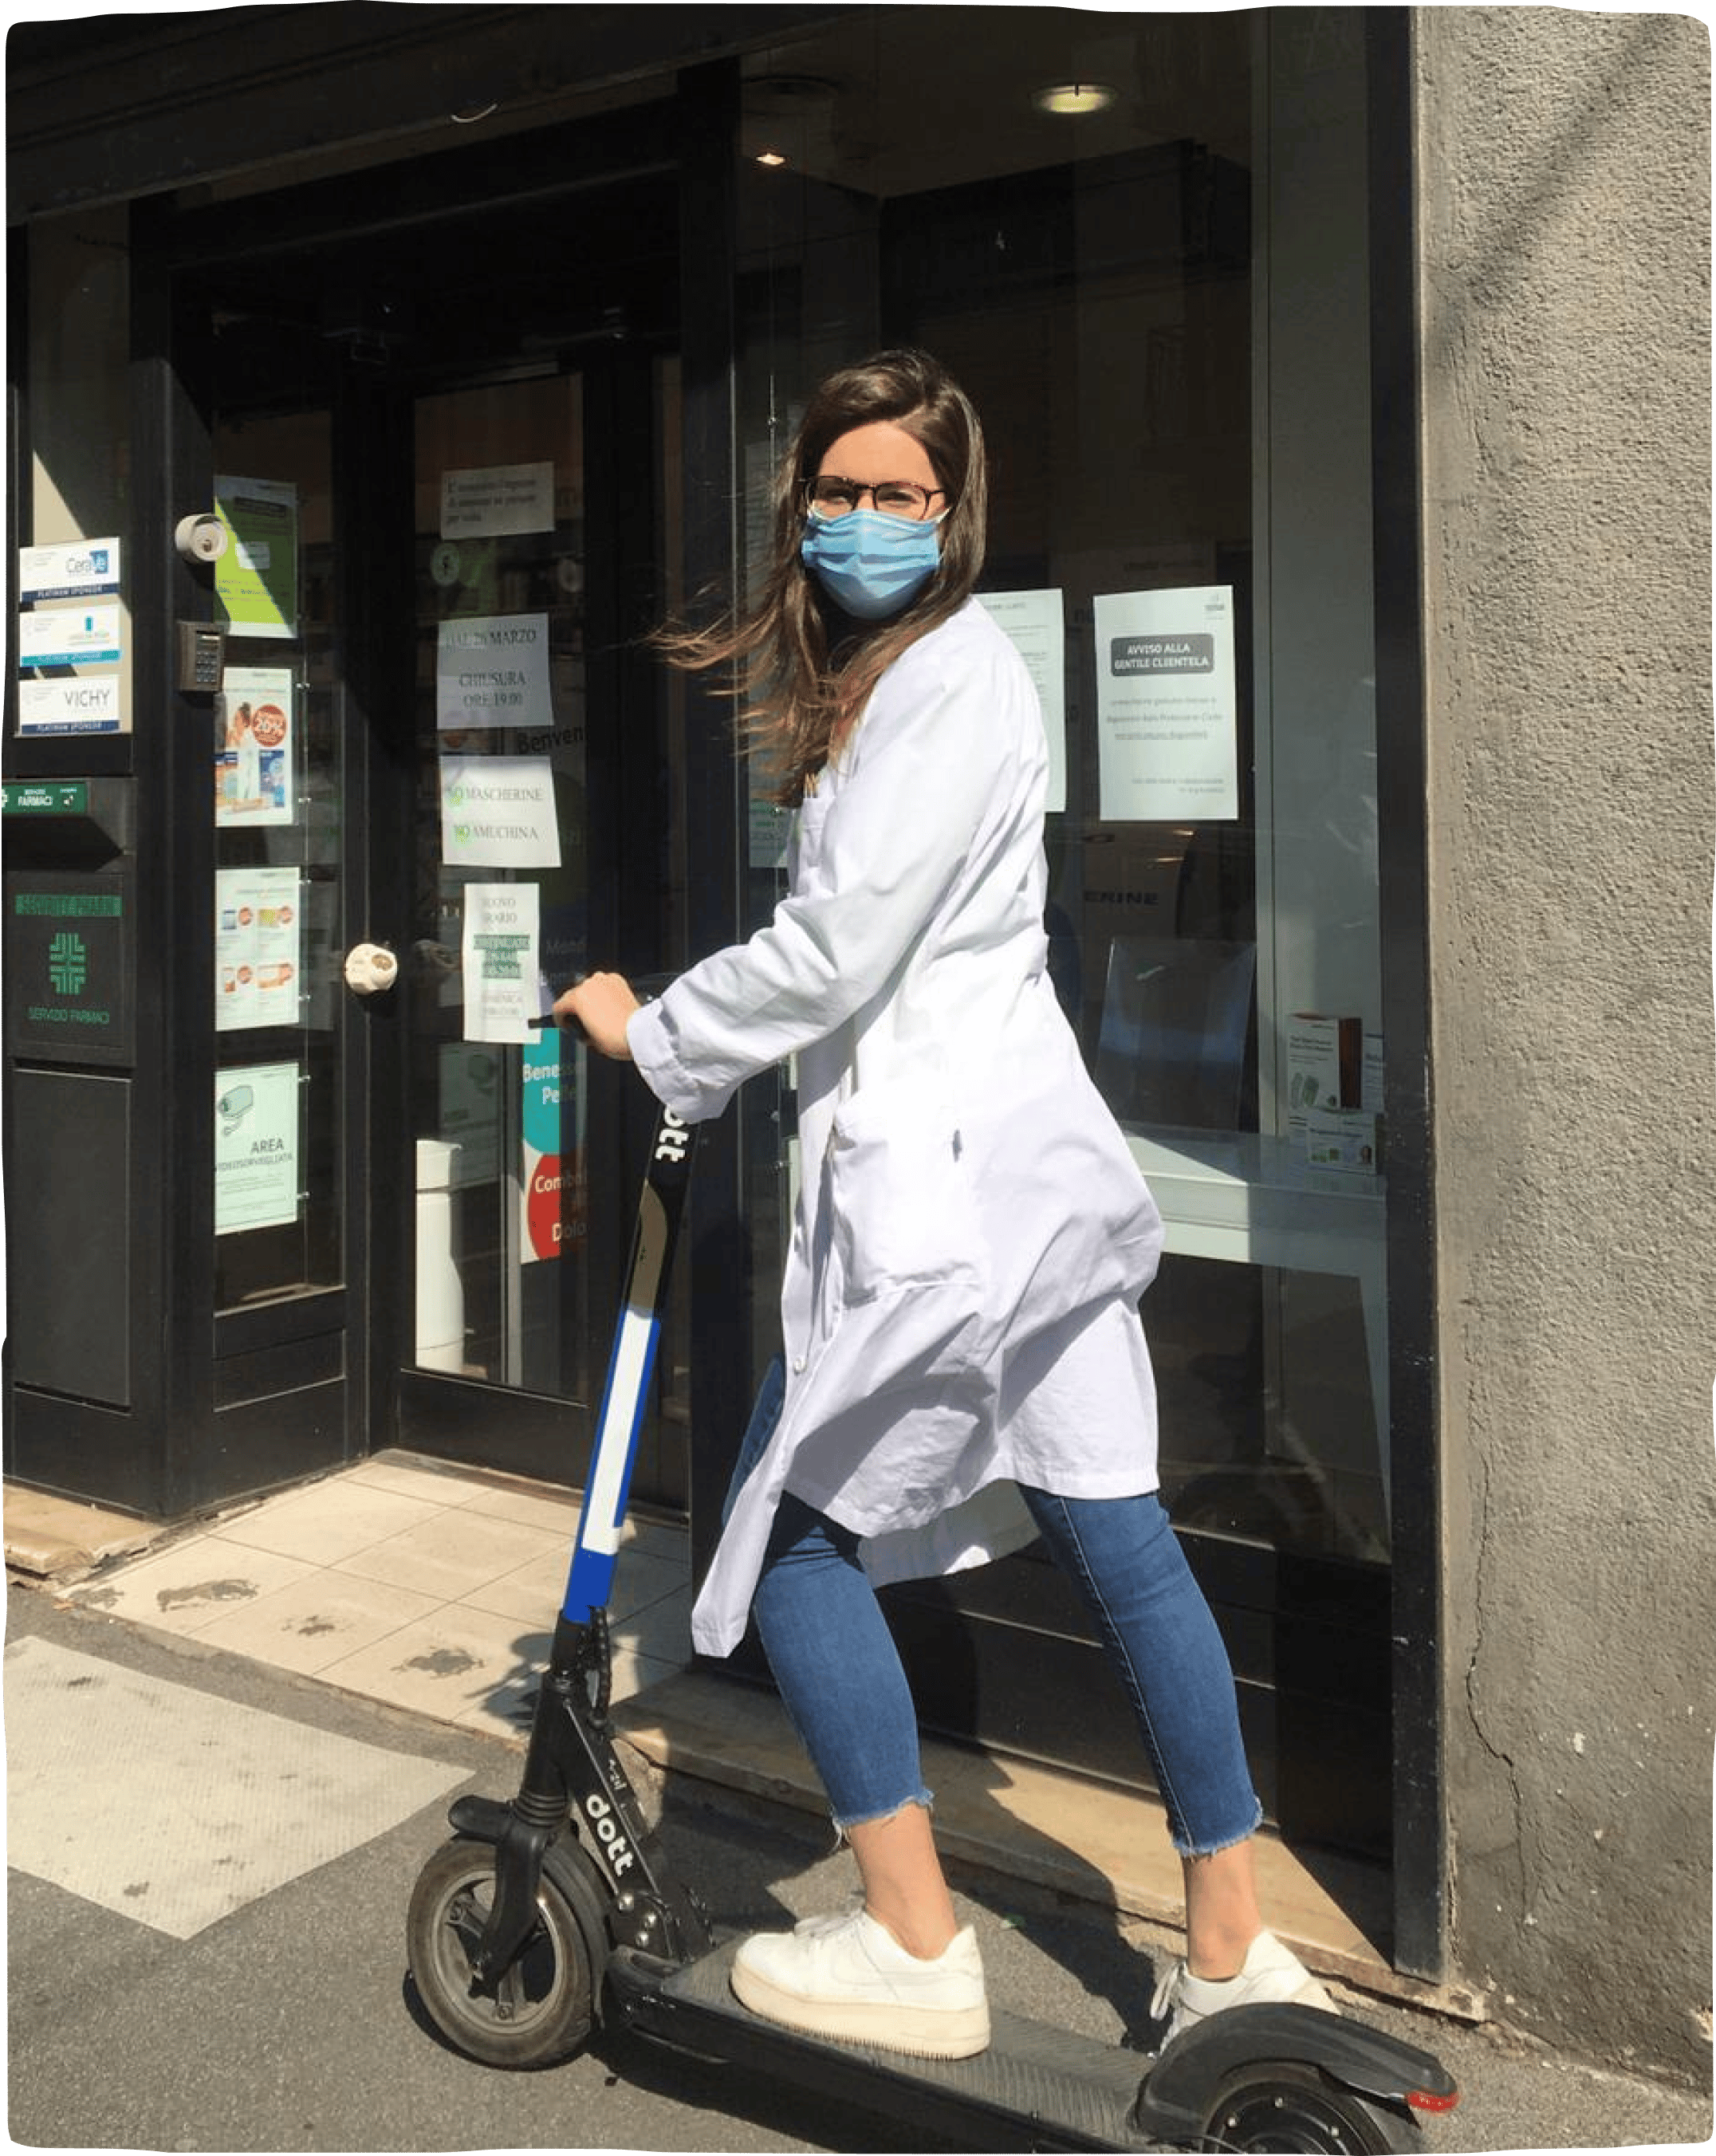 An A&E worker wearing a mask and white coat, posing with a Dott e-scooter outside of a pharmacy.